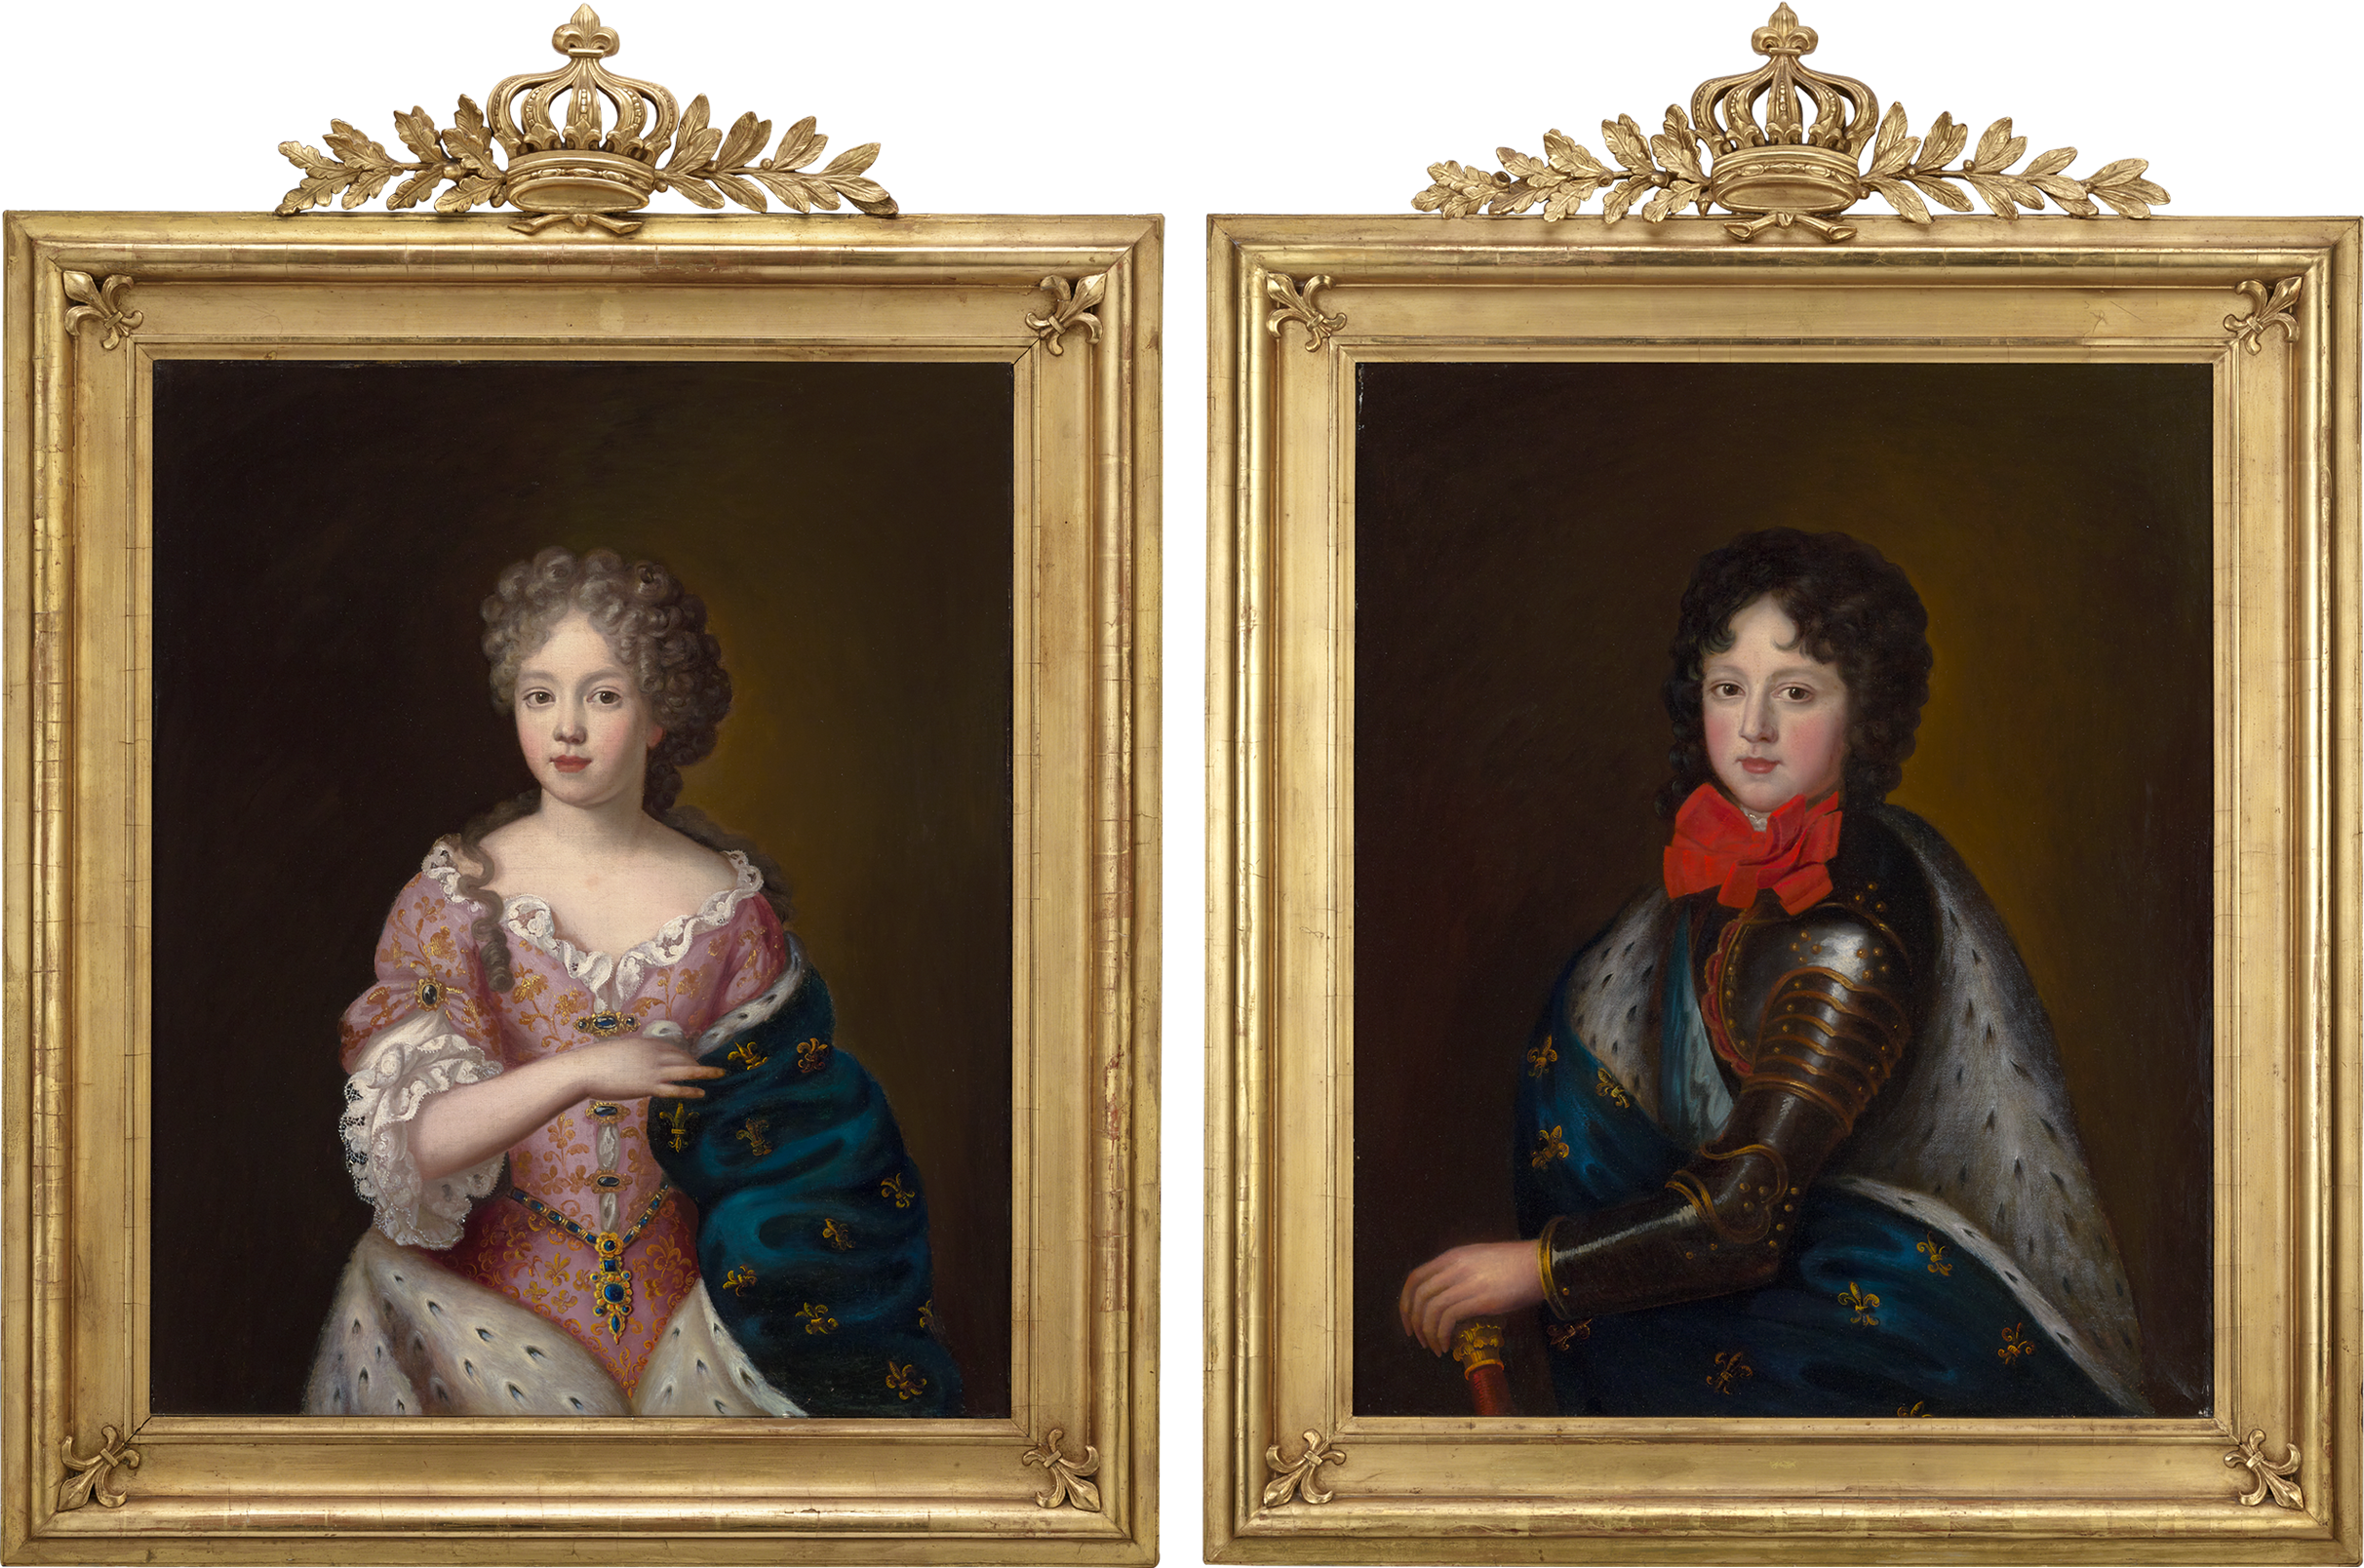 Pair of Royal Portraits of the Duke and Duchess of Burgundy